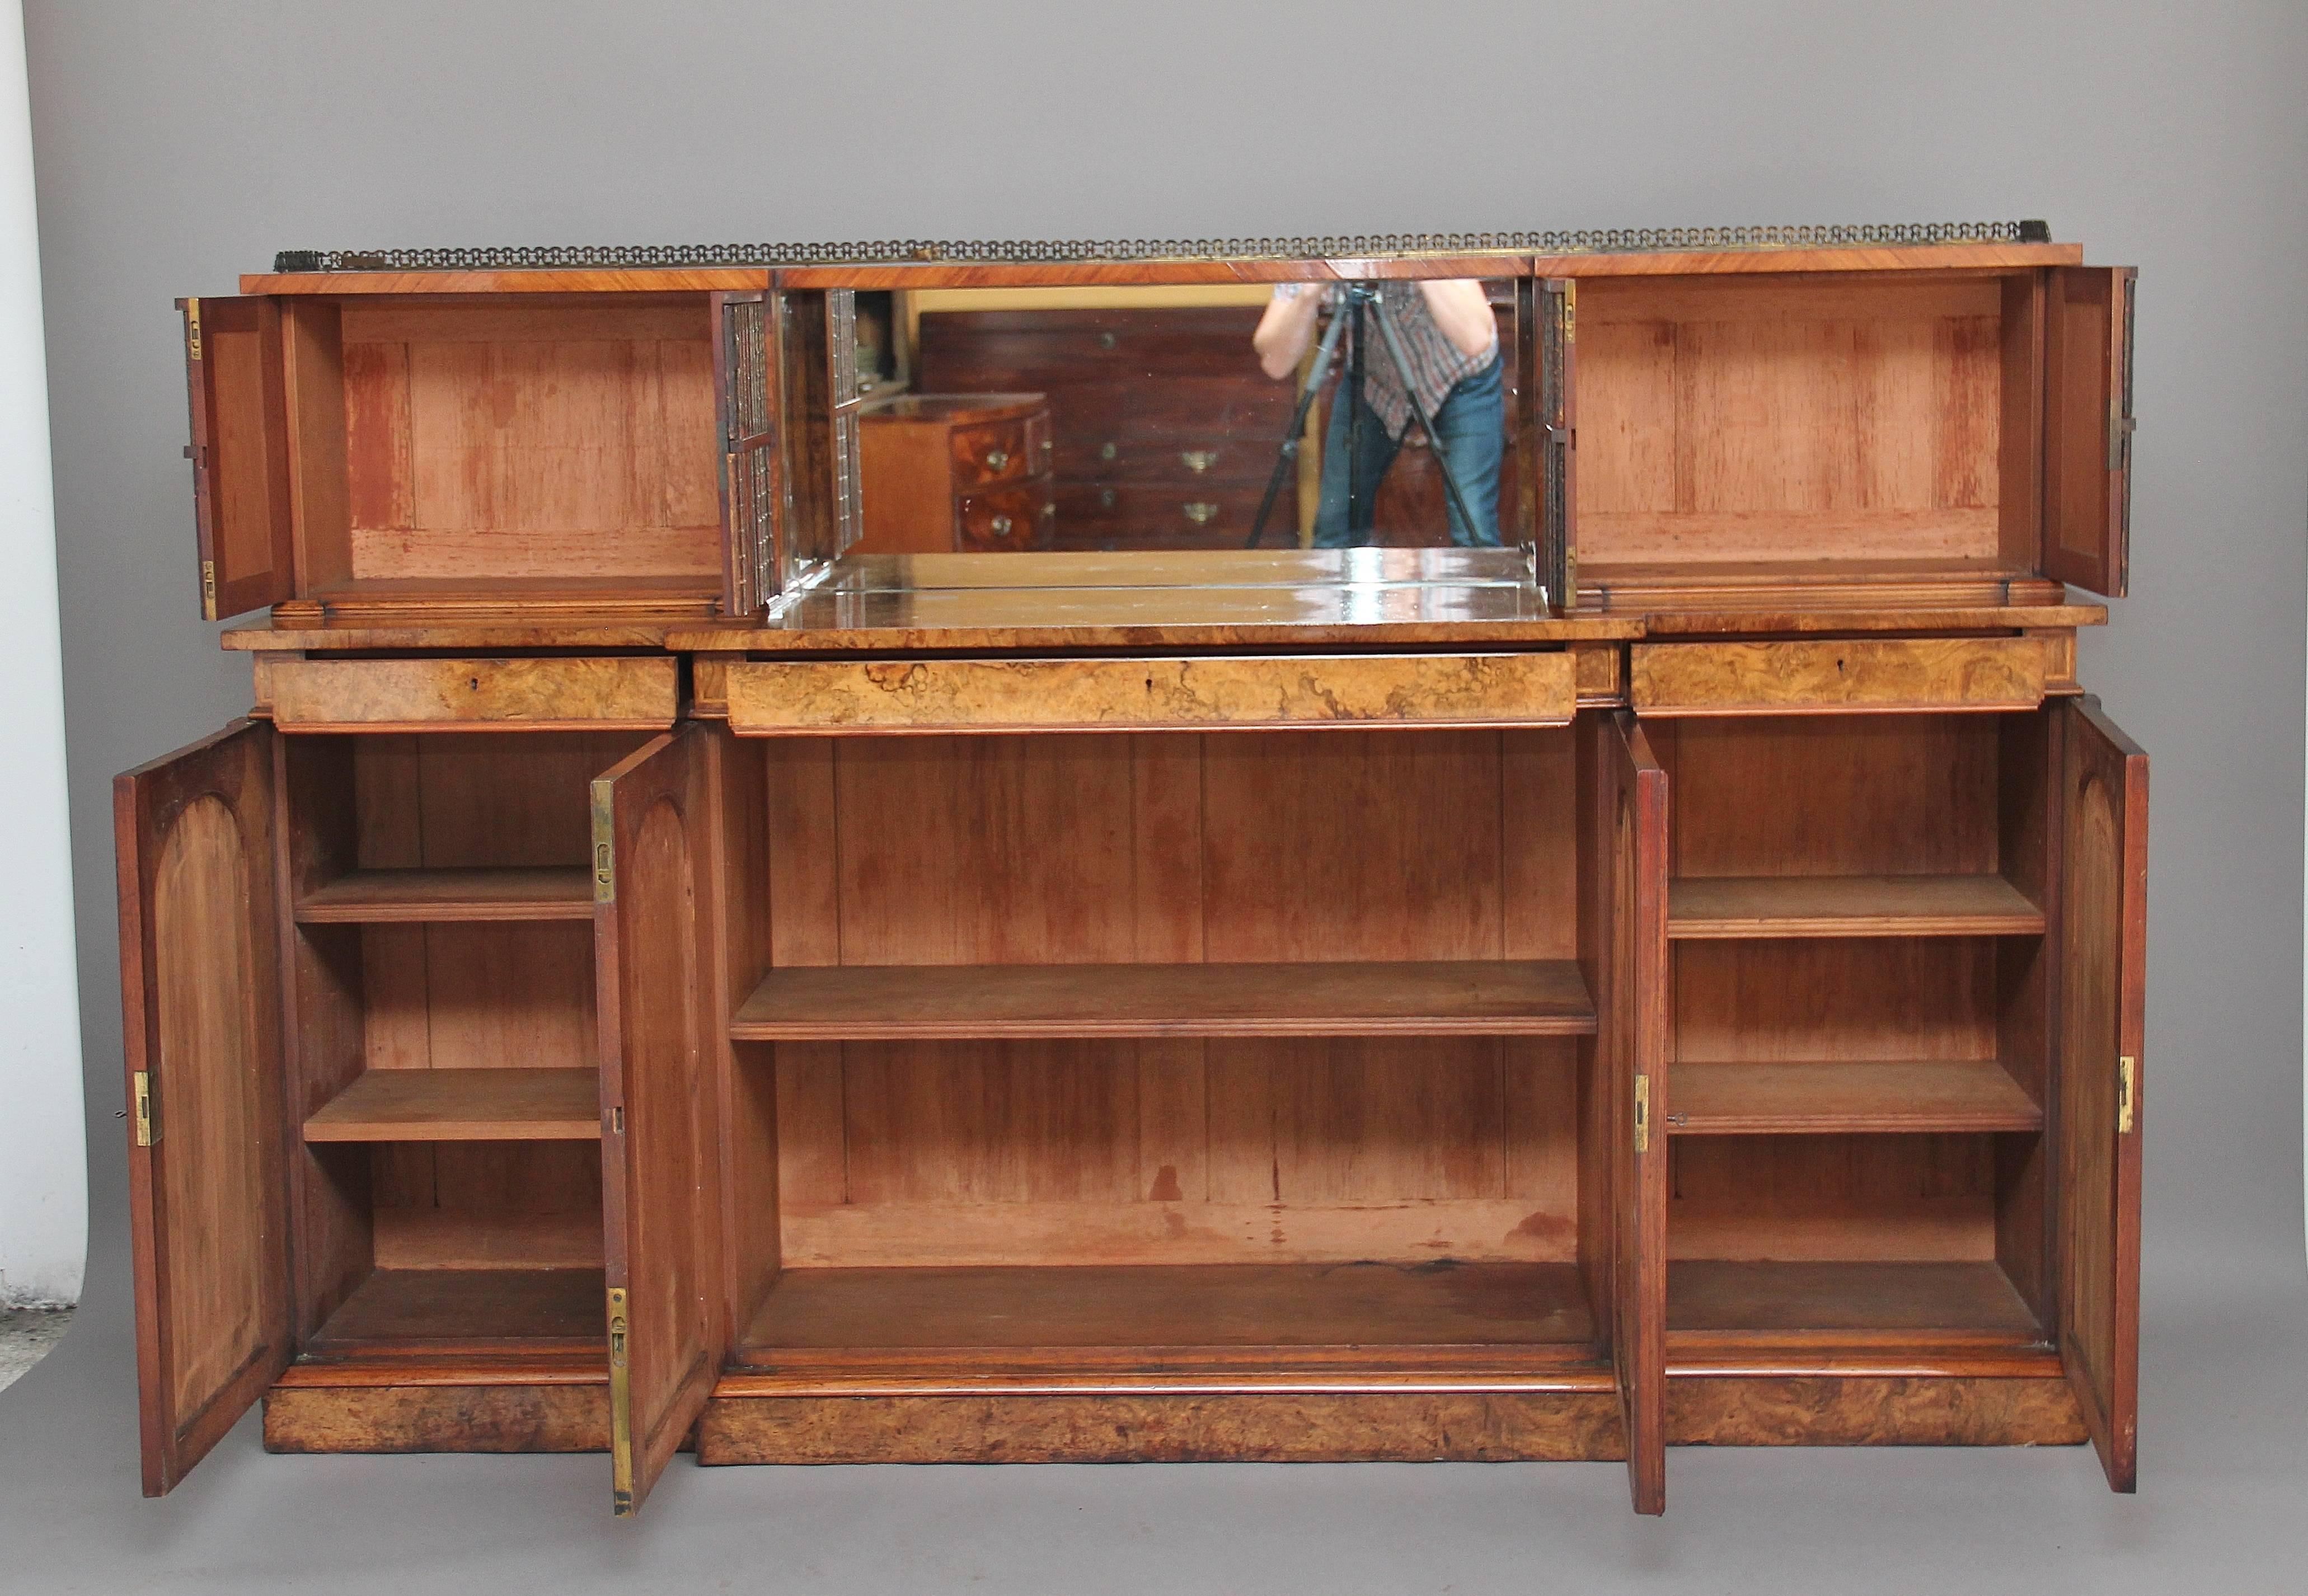 A fantastic quality 19th century burr walnut cabinet, the top section having a brass gallery running along the back and sides, with a mirror below flanked by cupboards either side with the door fronts decorated with book spines, the top of the